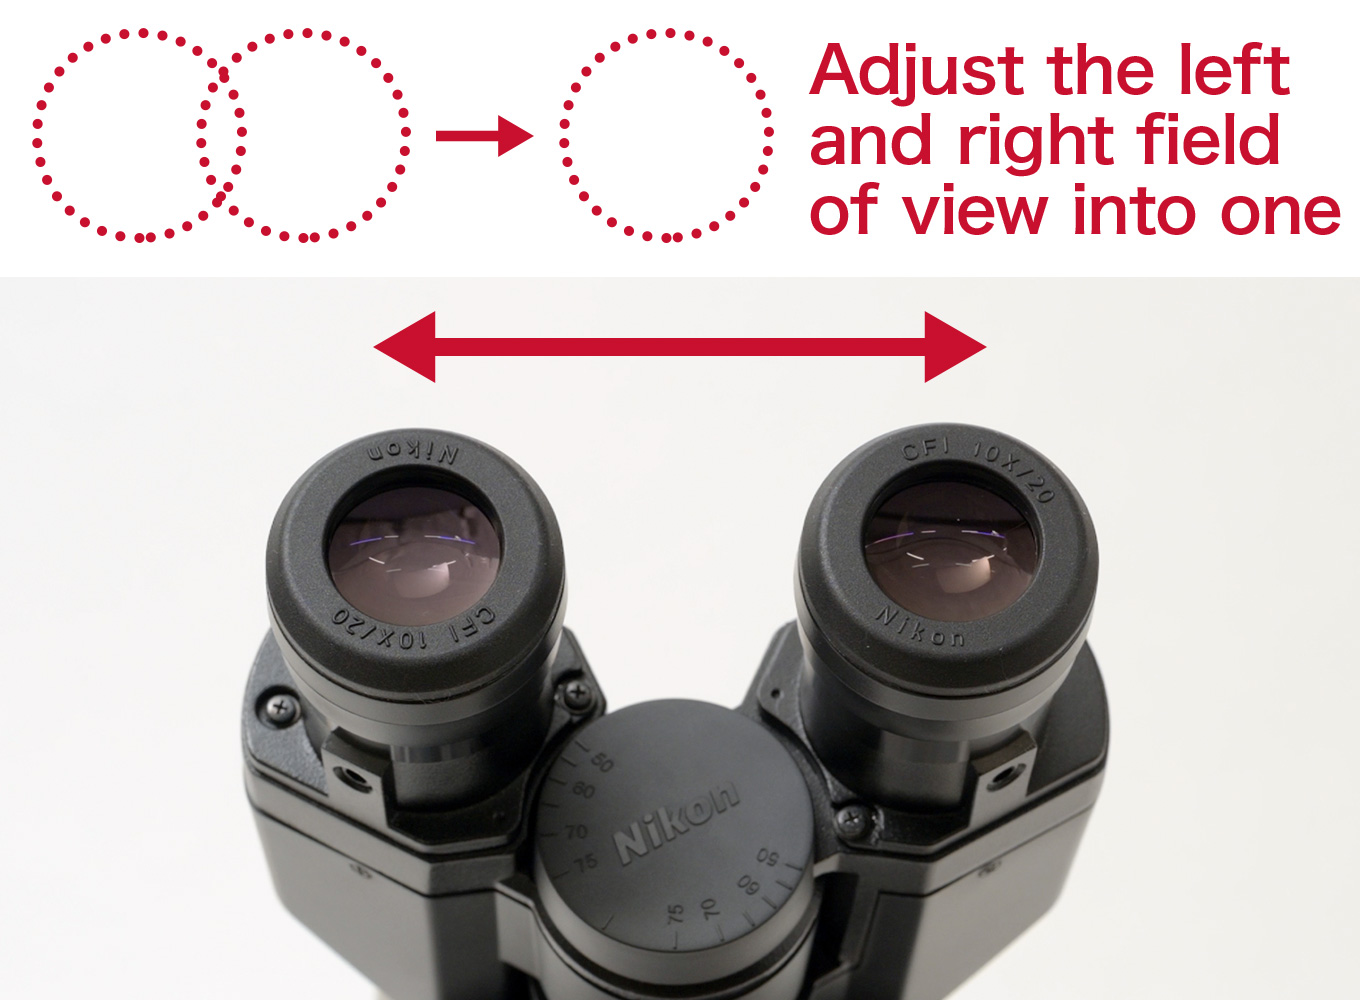 Adjust the left and right field of view into one